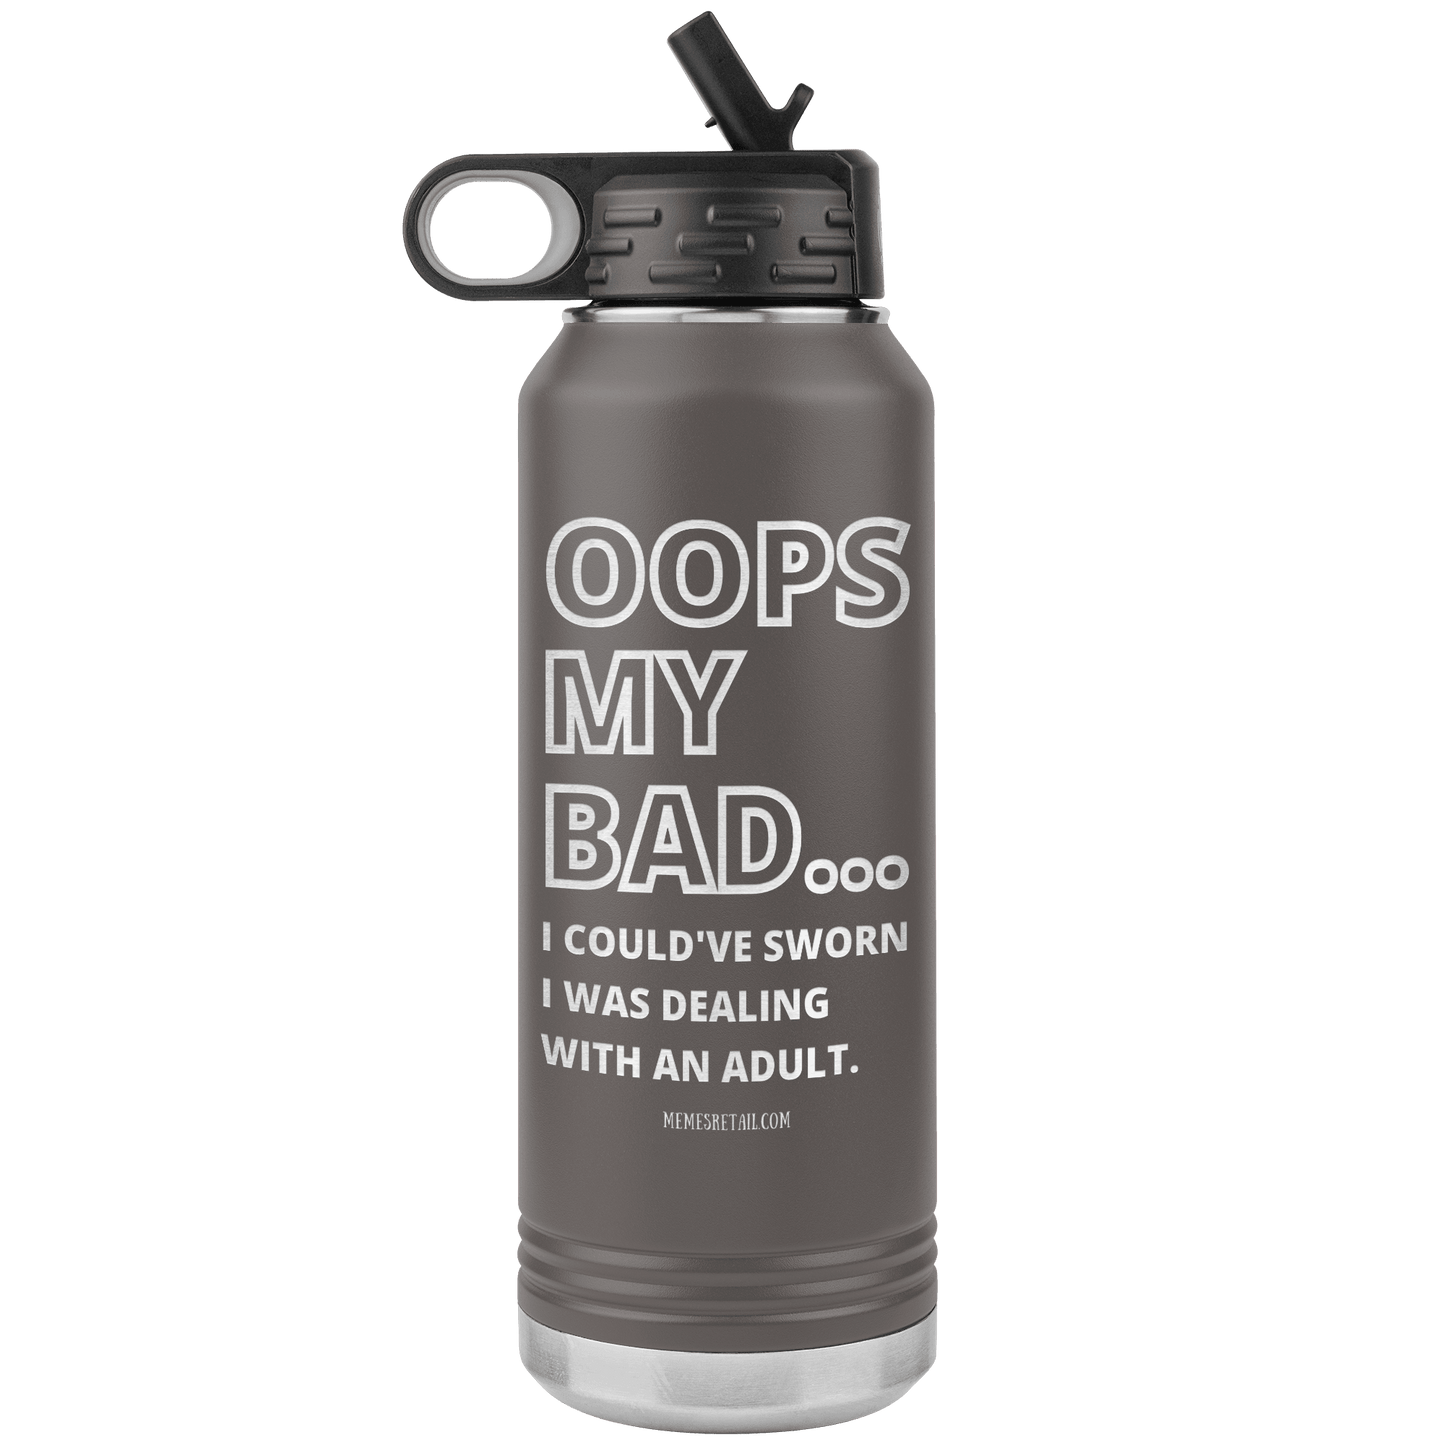 OOPS My bad...i could've sworn i was talking with an adult 32 oz Water Tumbler, Pewter - MemesRetail.com